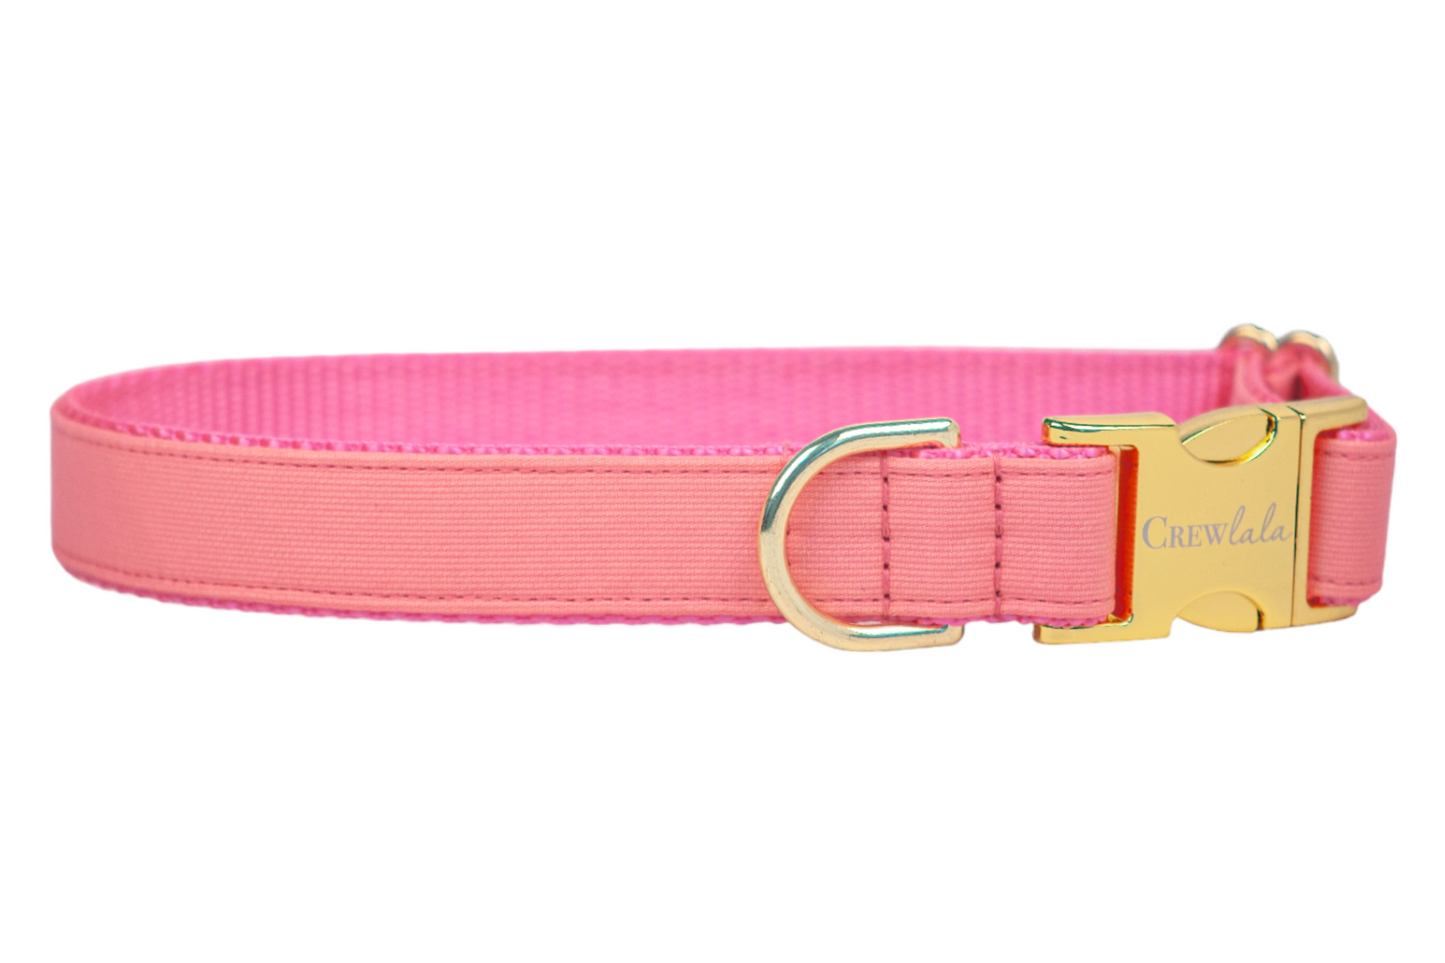 Coral Belle Bow Dog Collar - Crew LaLa